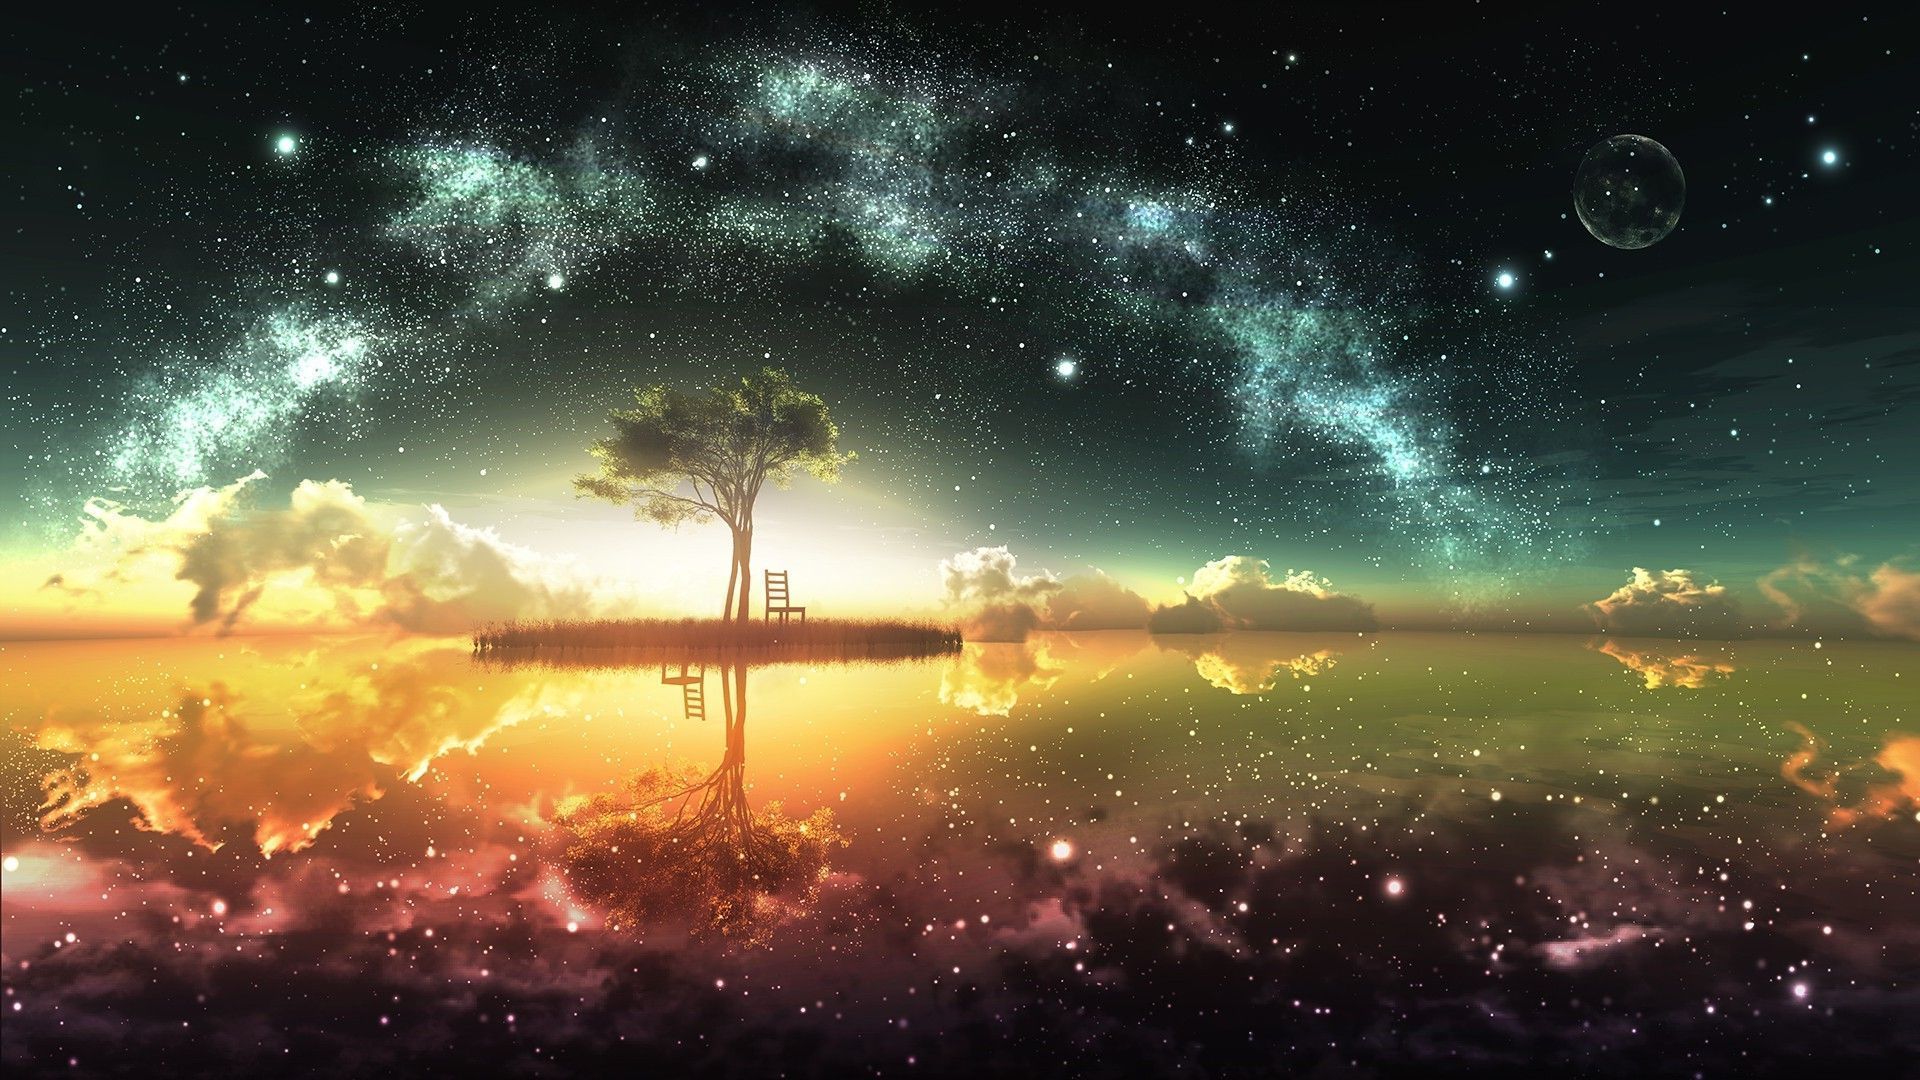 Small island under the colorful night sky, lake, chair, tree, star ...